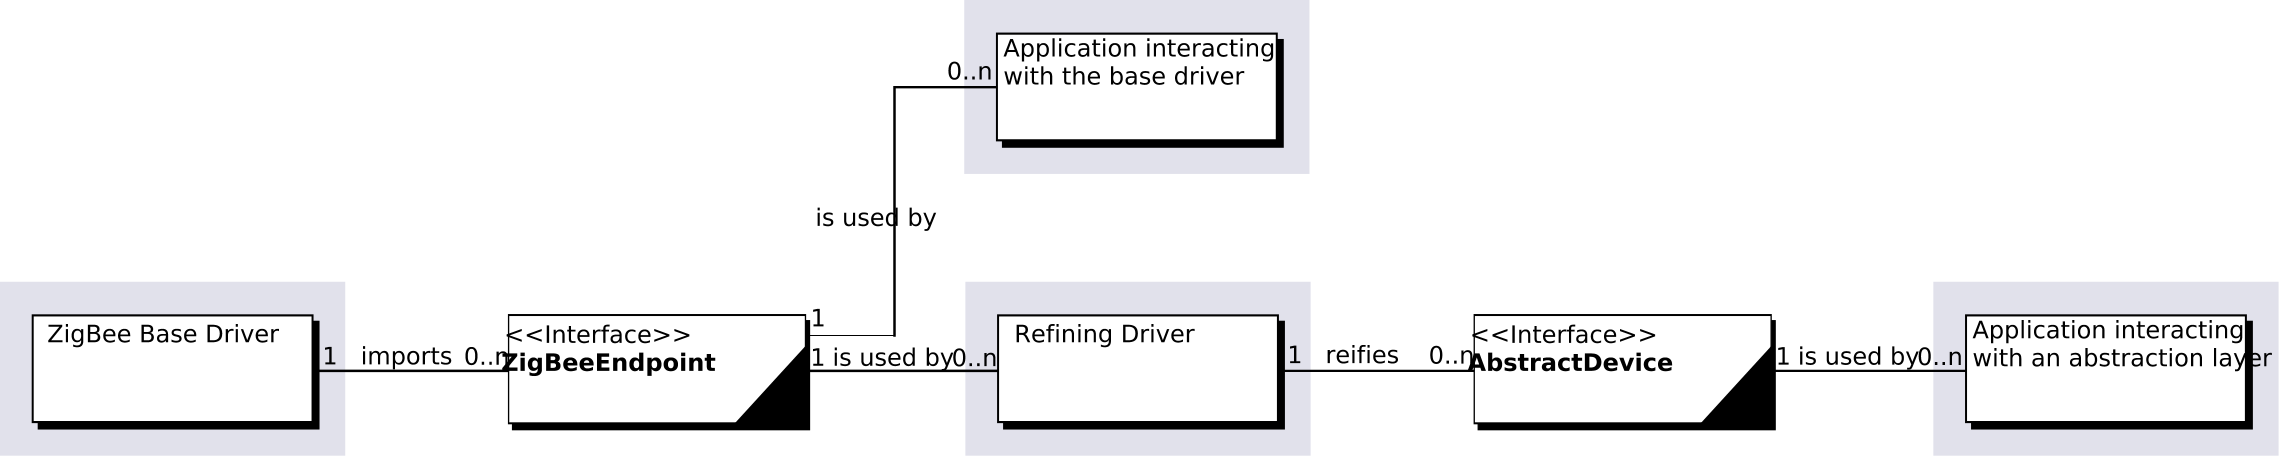 The ZigBee Base Driver and a refining driver representing devices in an abstract model